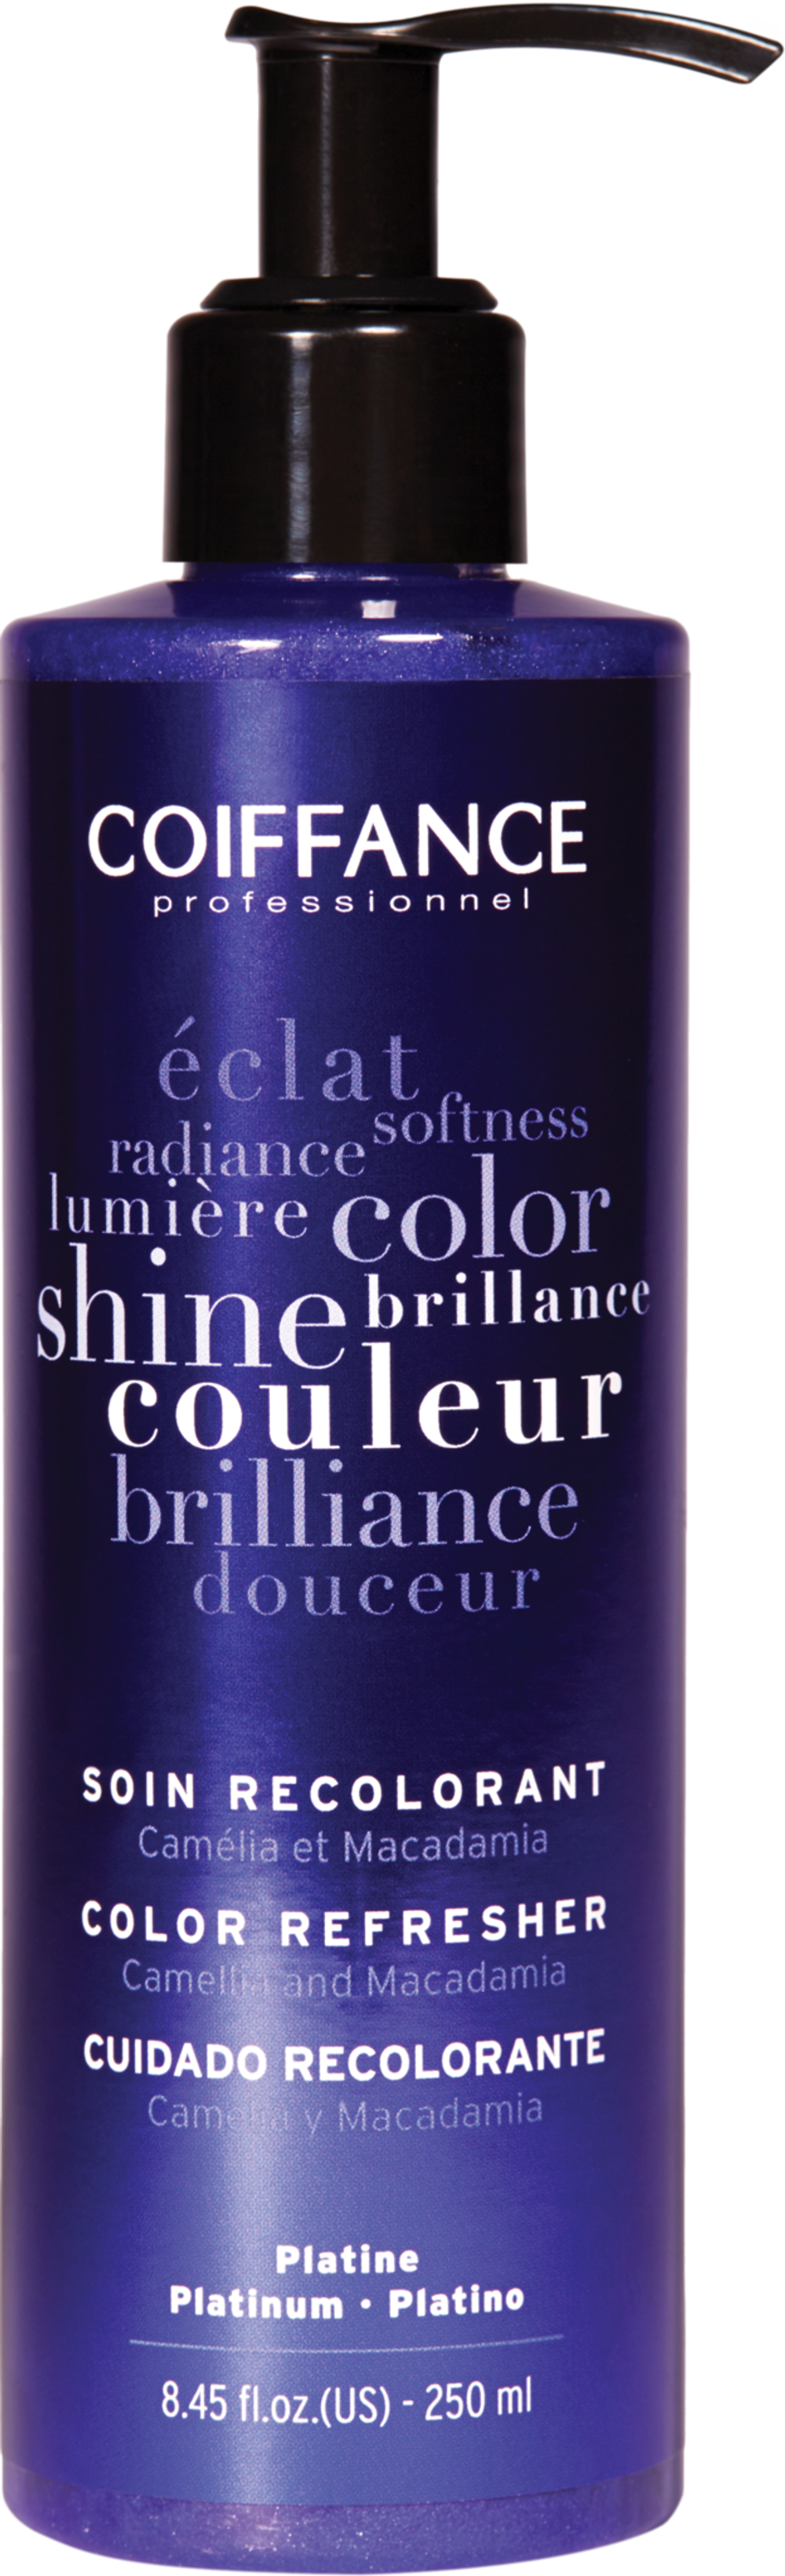 COIFFANCE COLOR BOOSTER - RECOLORING CARE PLATINUM